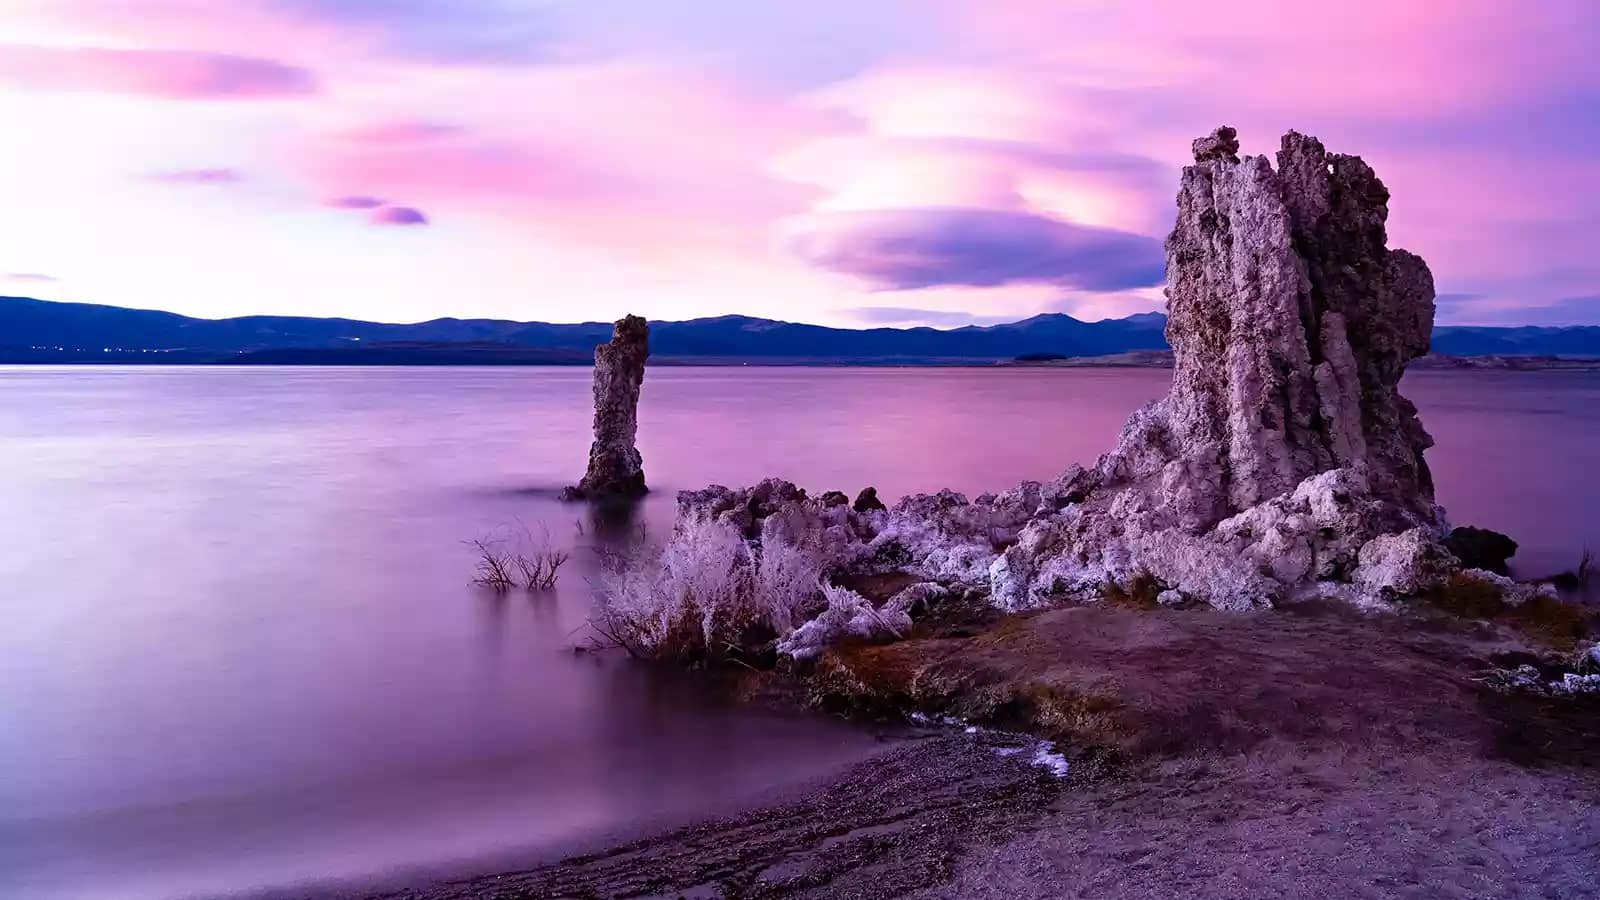 Knobbly tufa towers rise from the waters of Mono Lake, one of the most unique destinations for camping near California state parks.